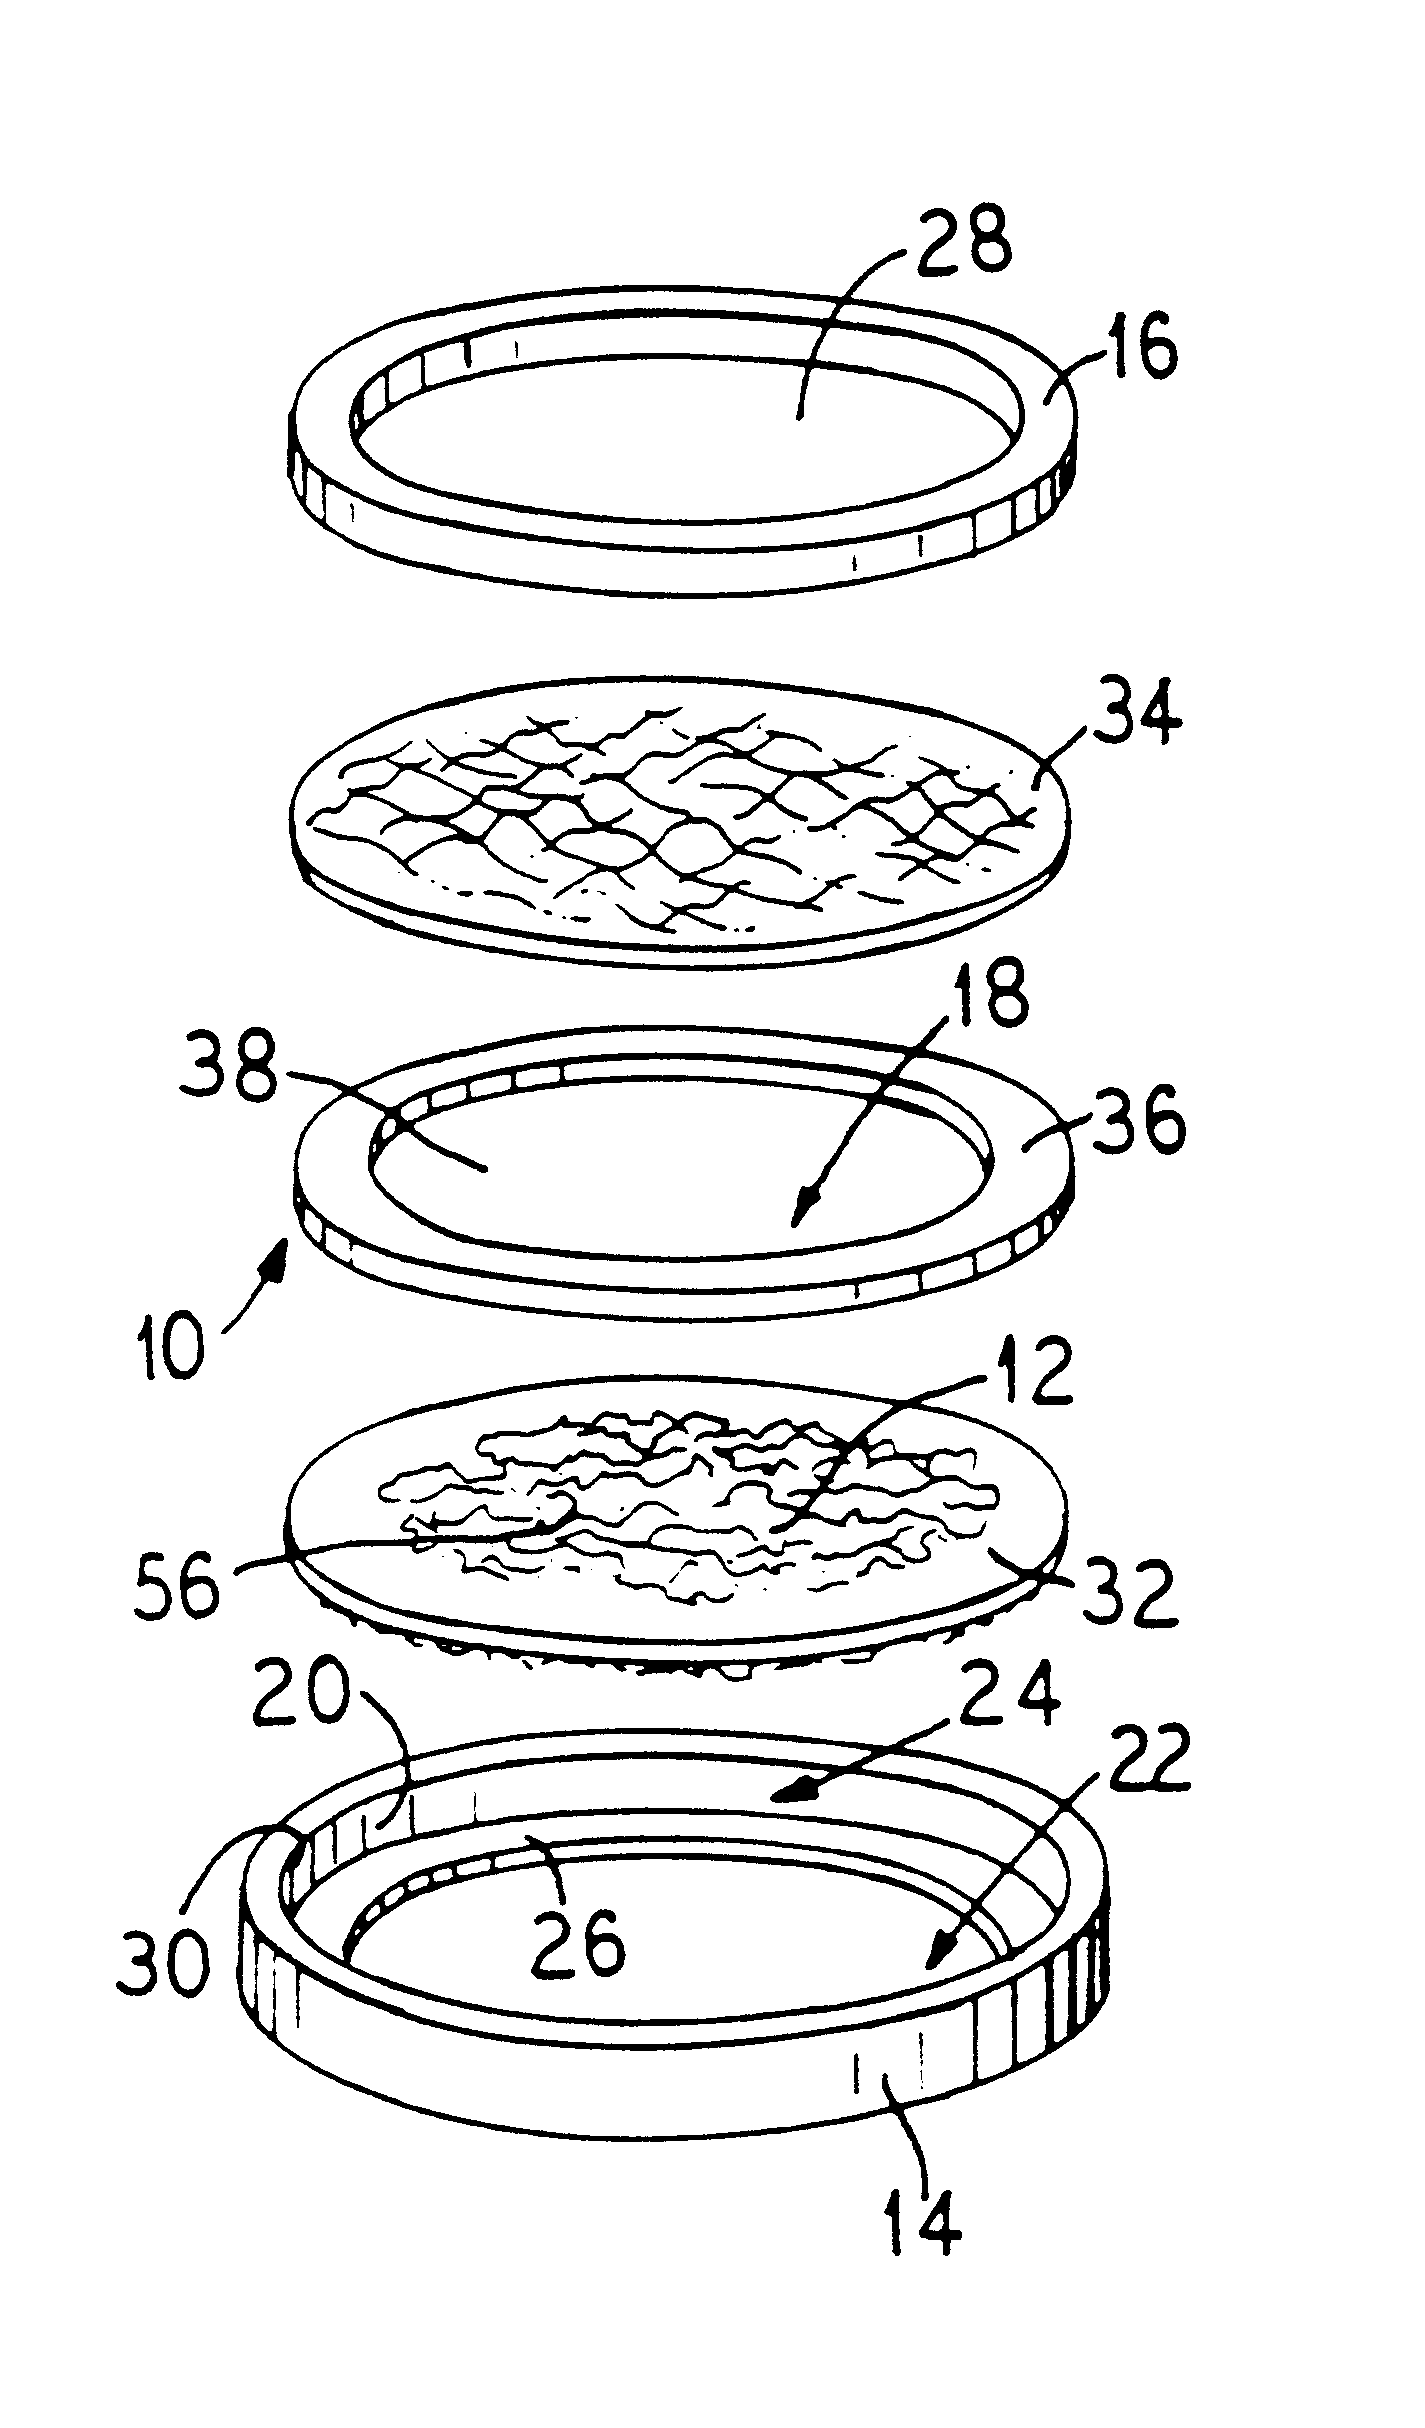 Angiogenic tissue implant systems and methods